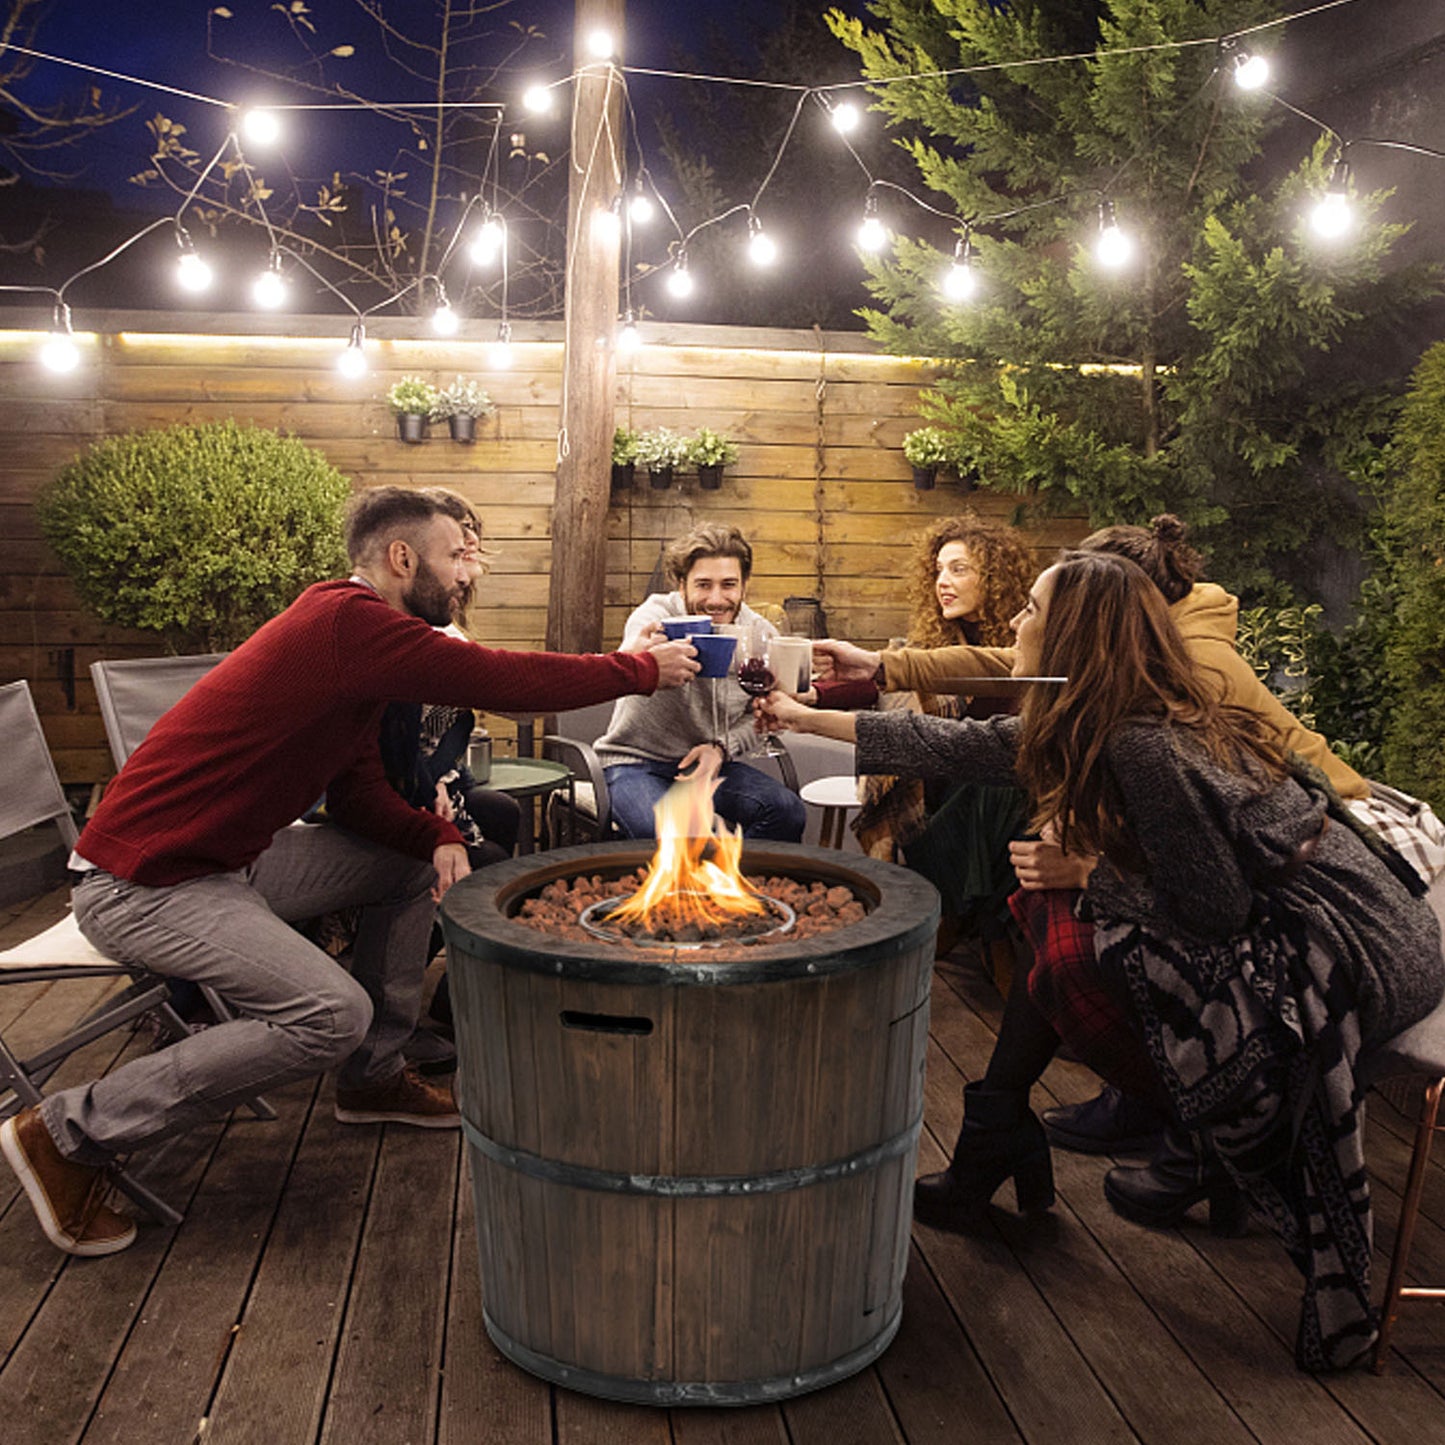 27" Outdoor Wine Barrel Gas Fire Pits - Rustic, Durable, and Stylish Designs for Your Backyard